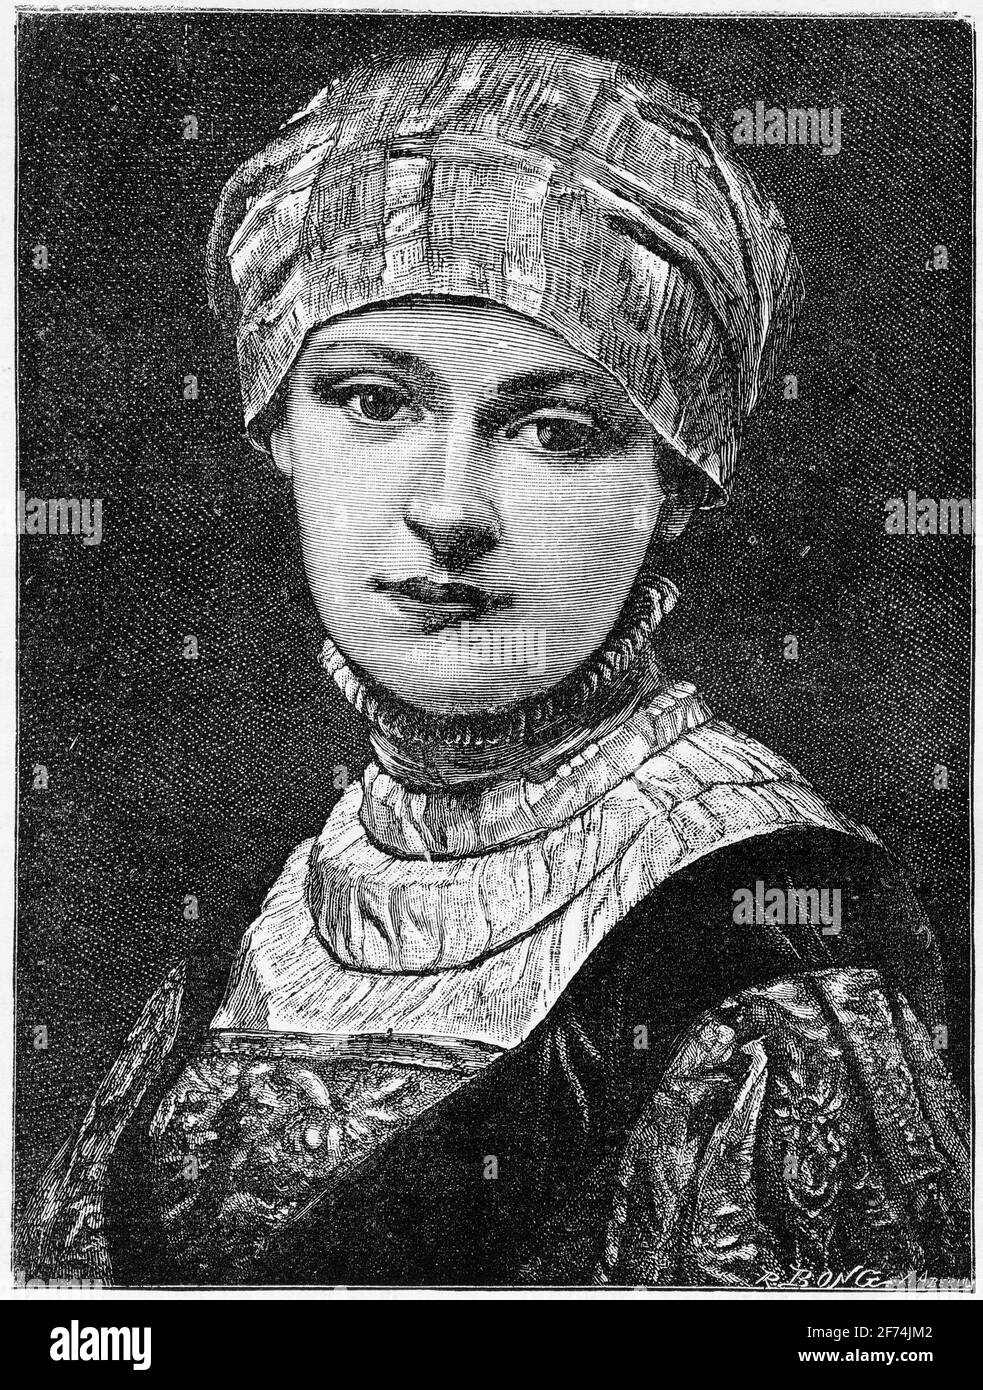 Engraved portrait of a young woman in middle eastern costume Stock Photo